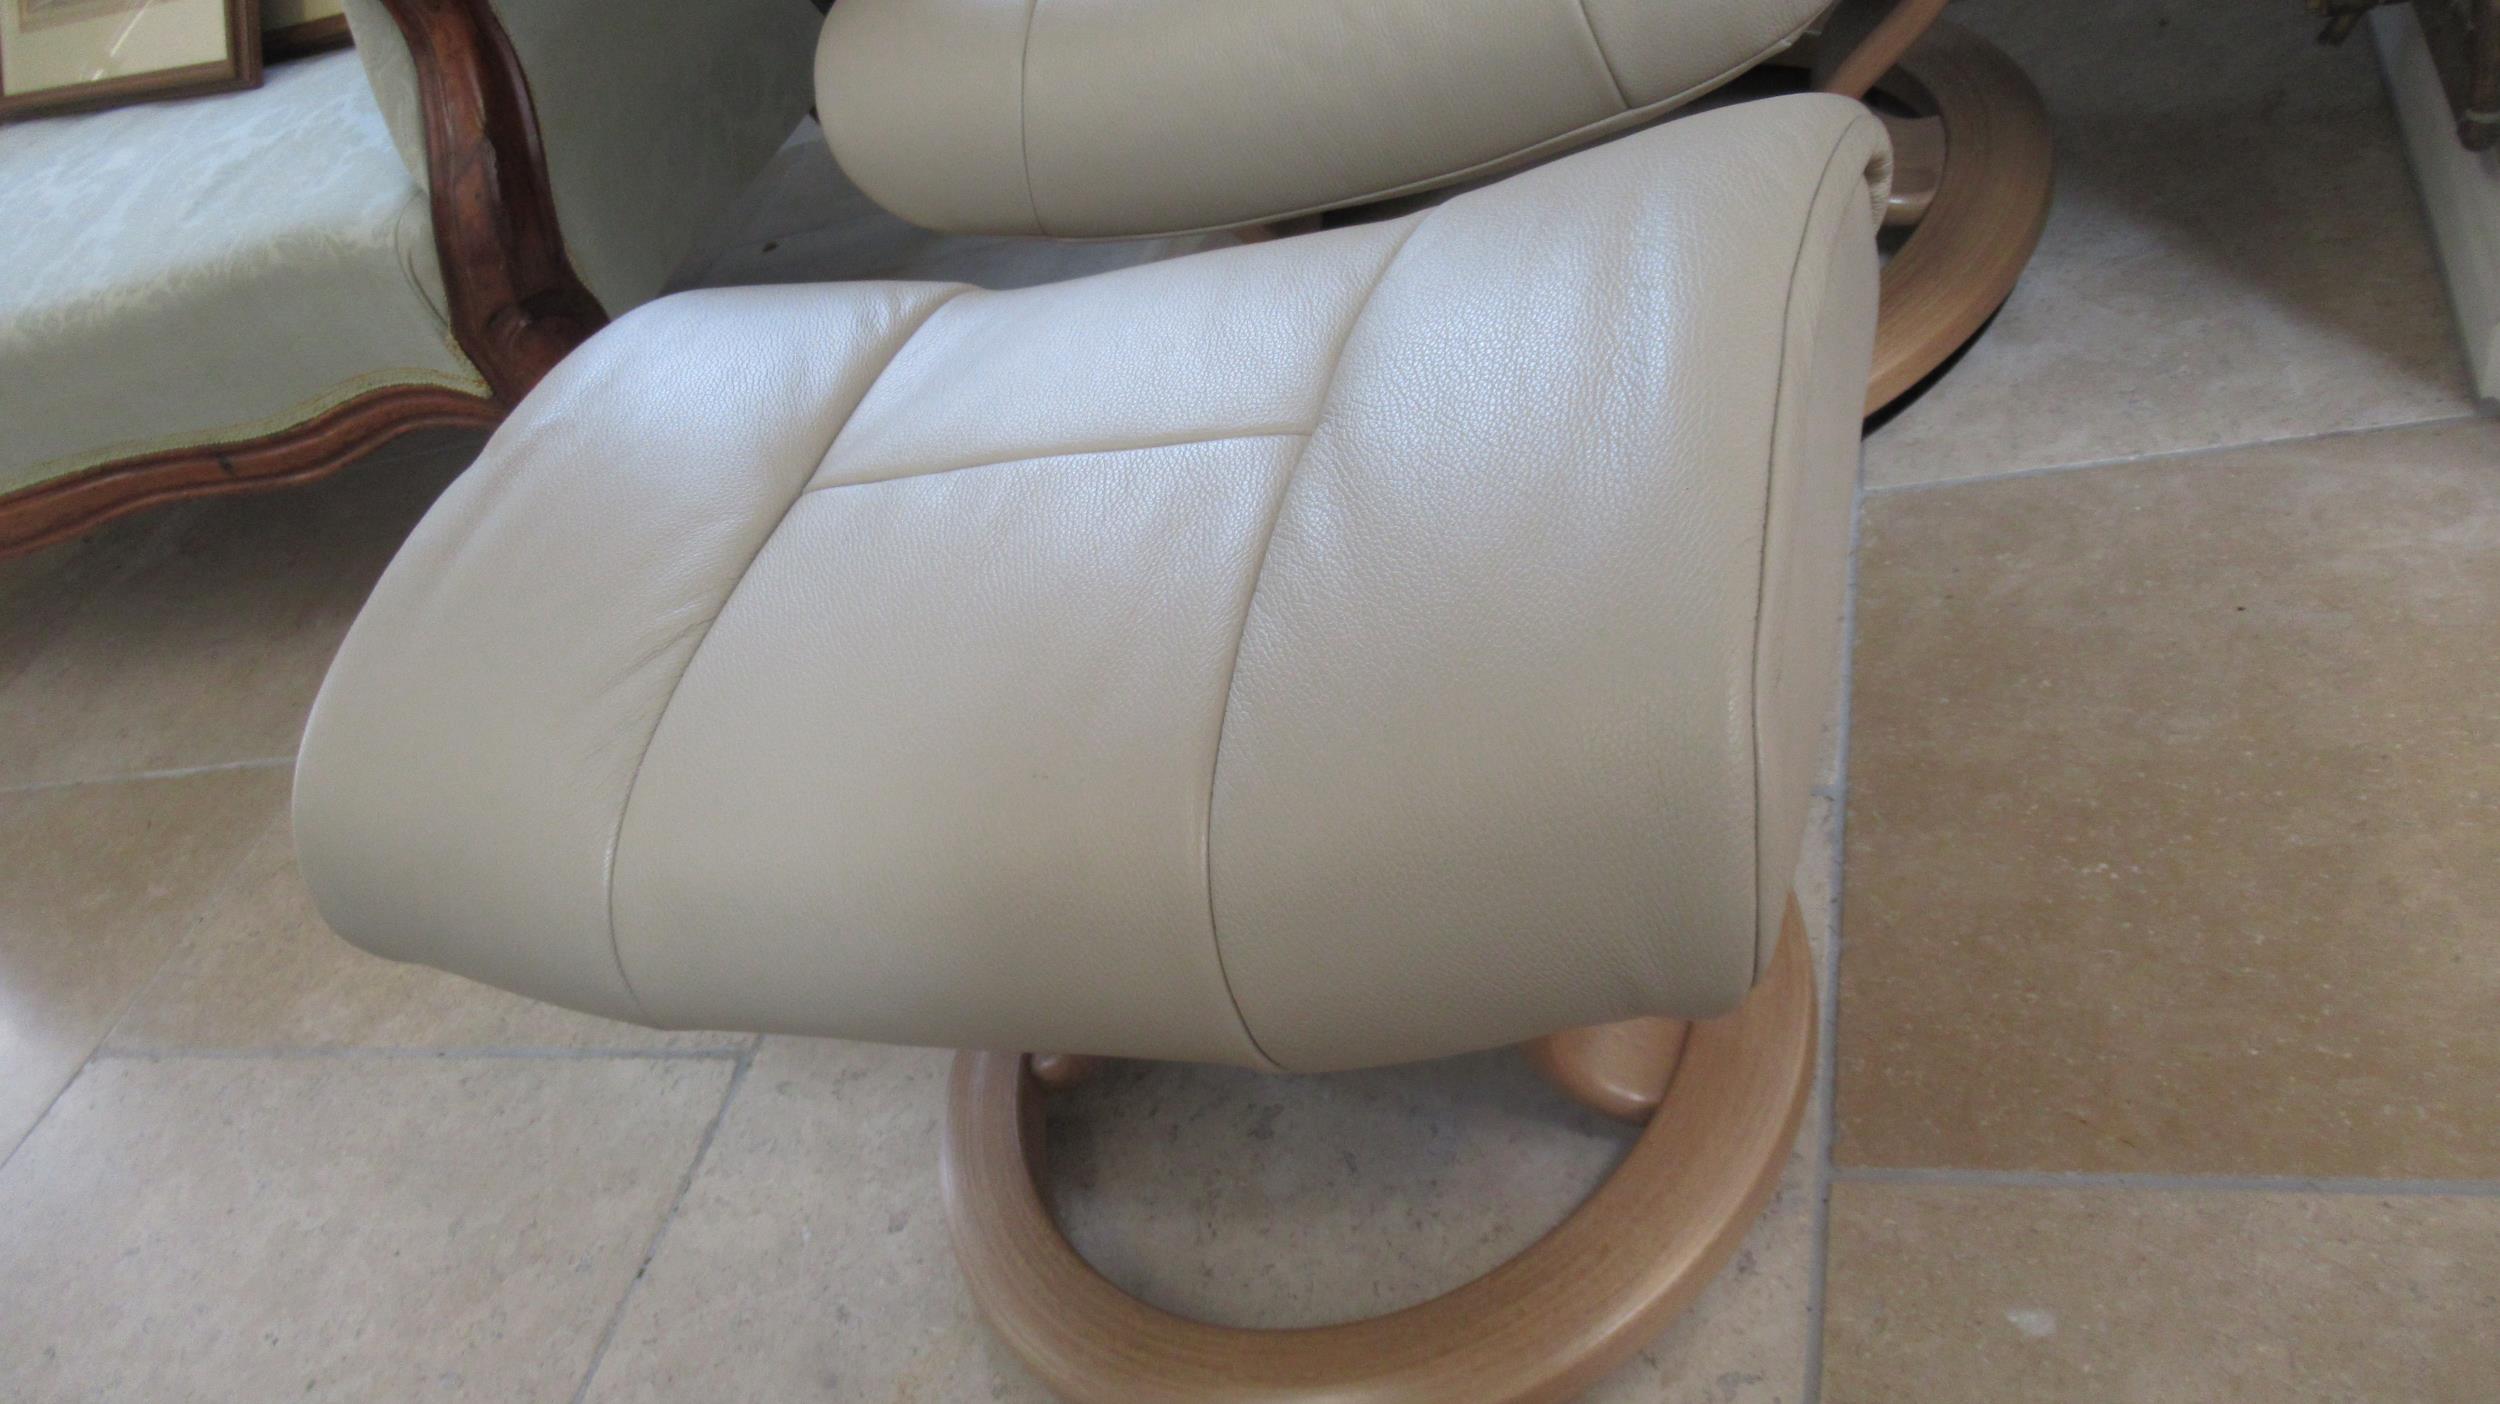 A Stressless Mayfair medium chair and stool, oak frame, with beige leather upholstery - Image 3 of 3